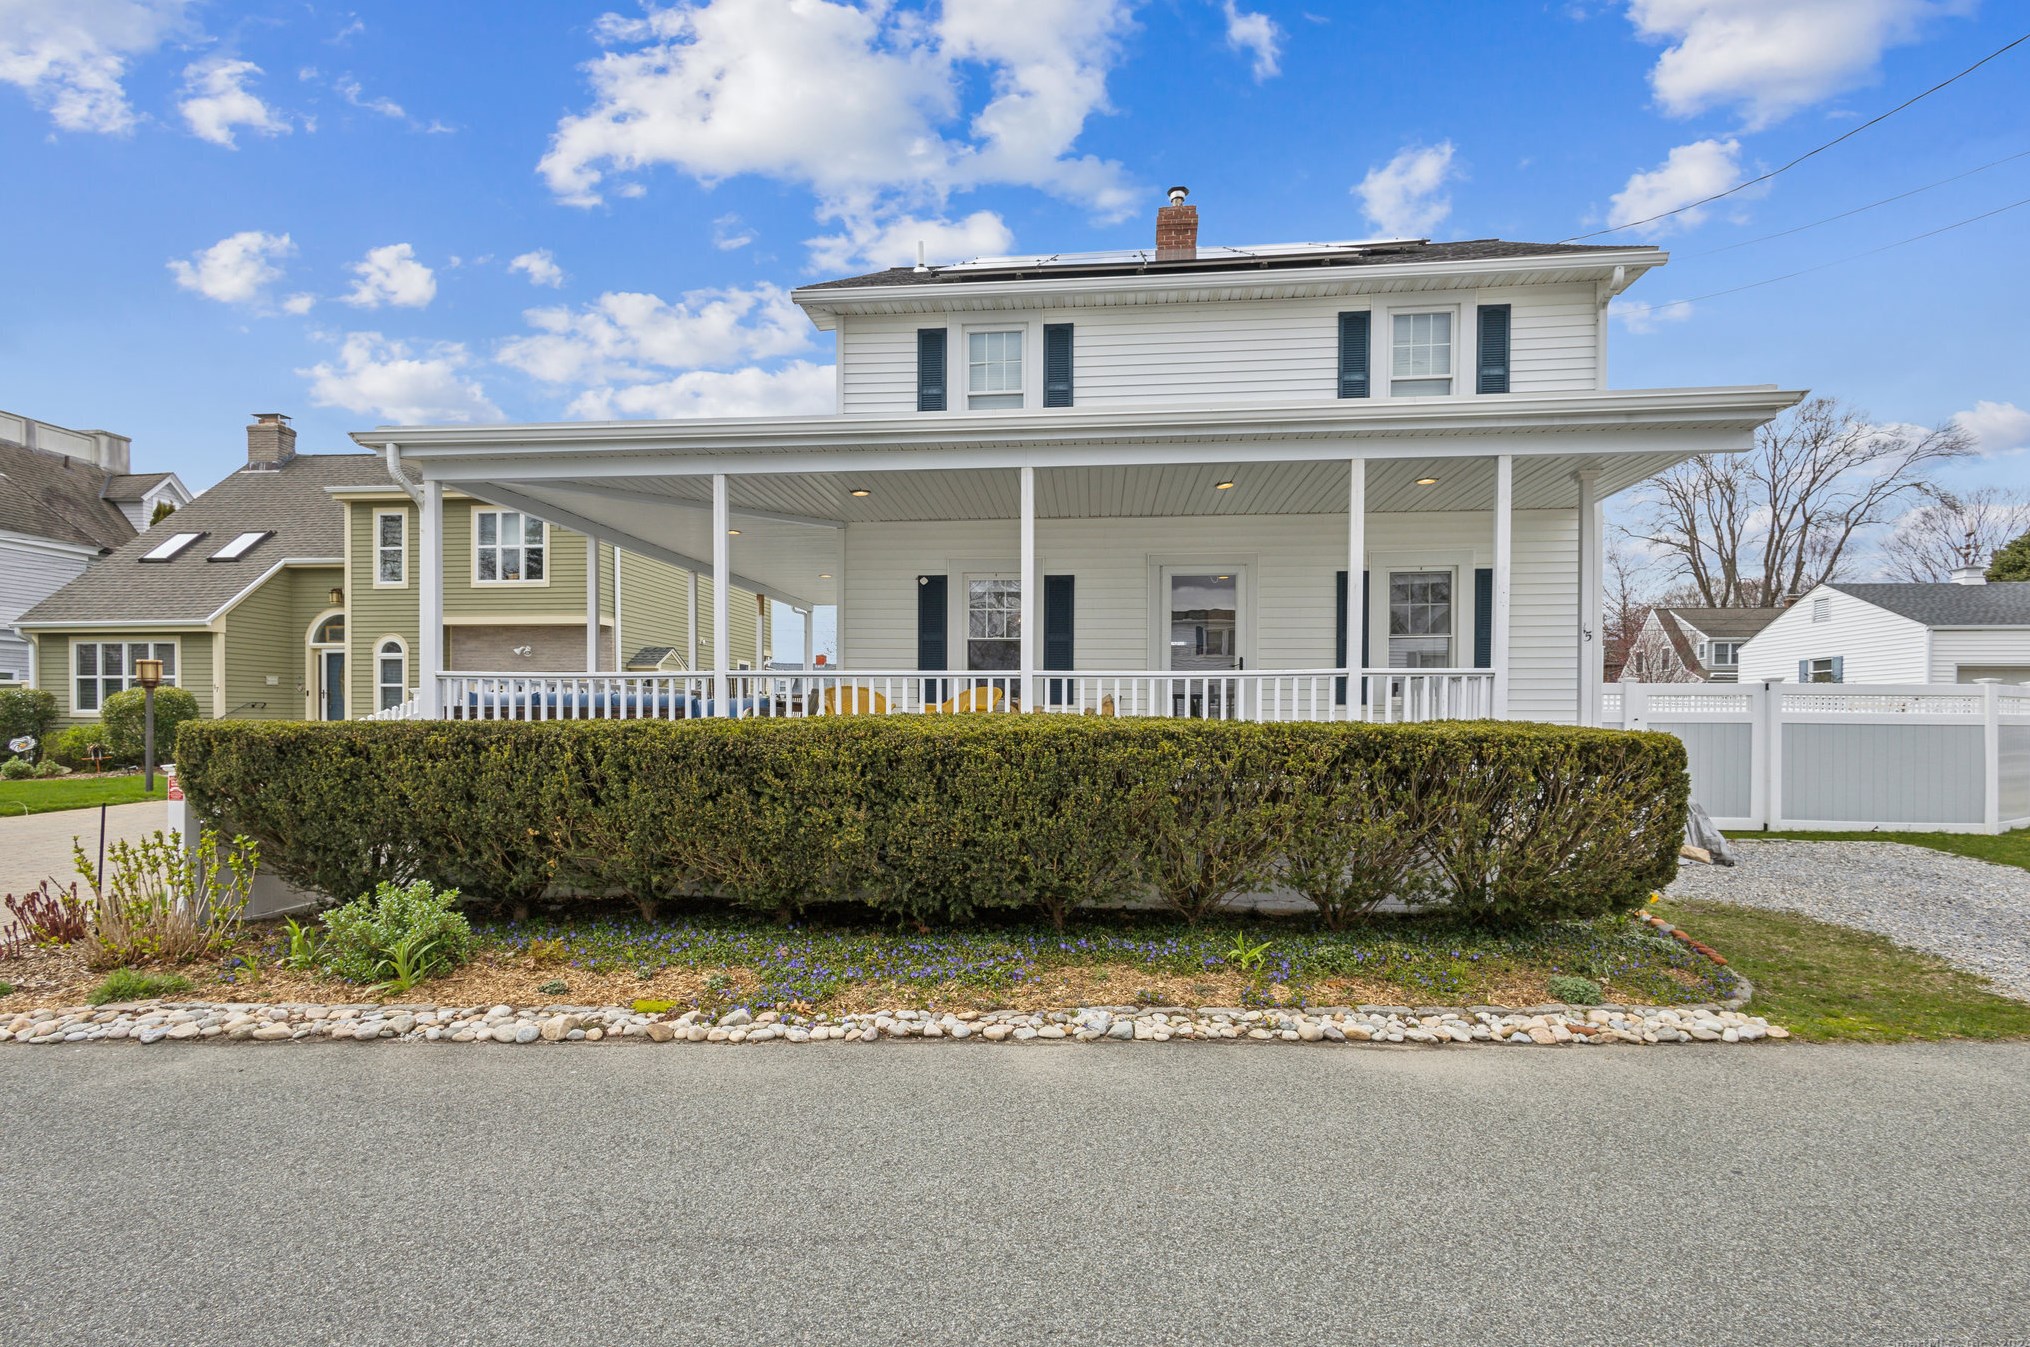 15 Sols Point Rd, Clinton, CT 06413